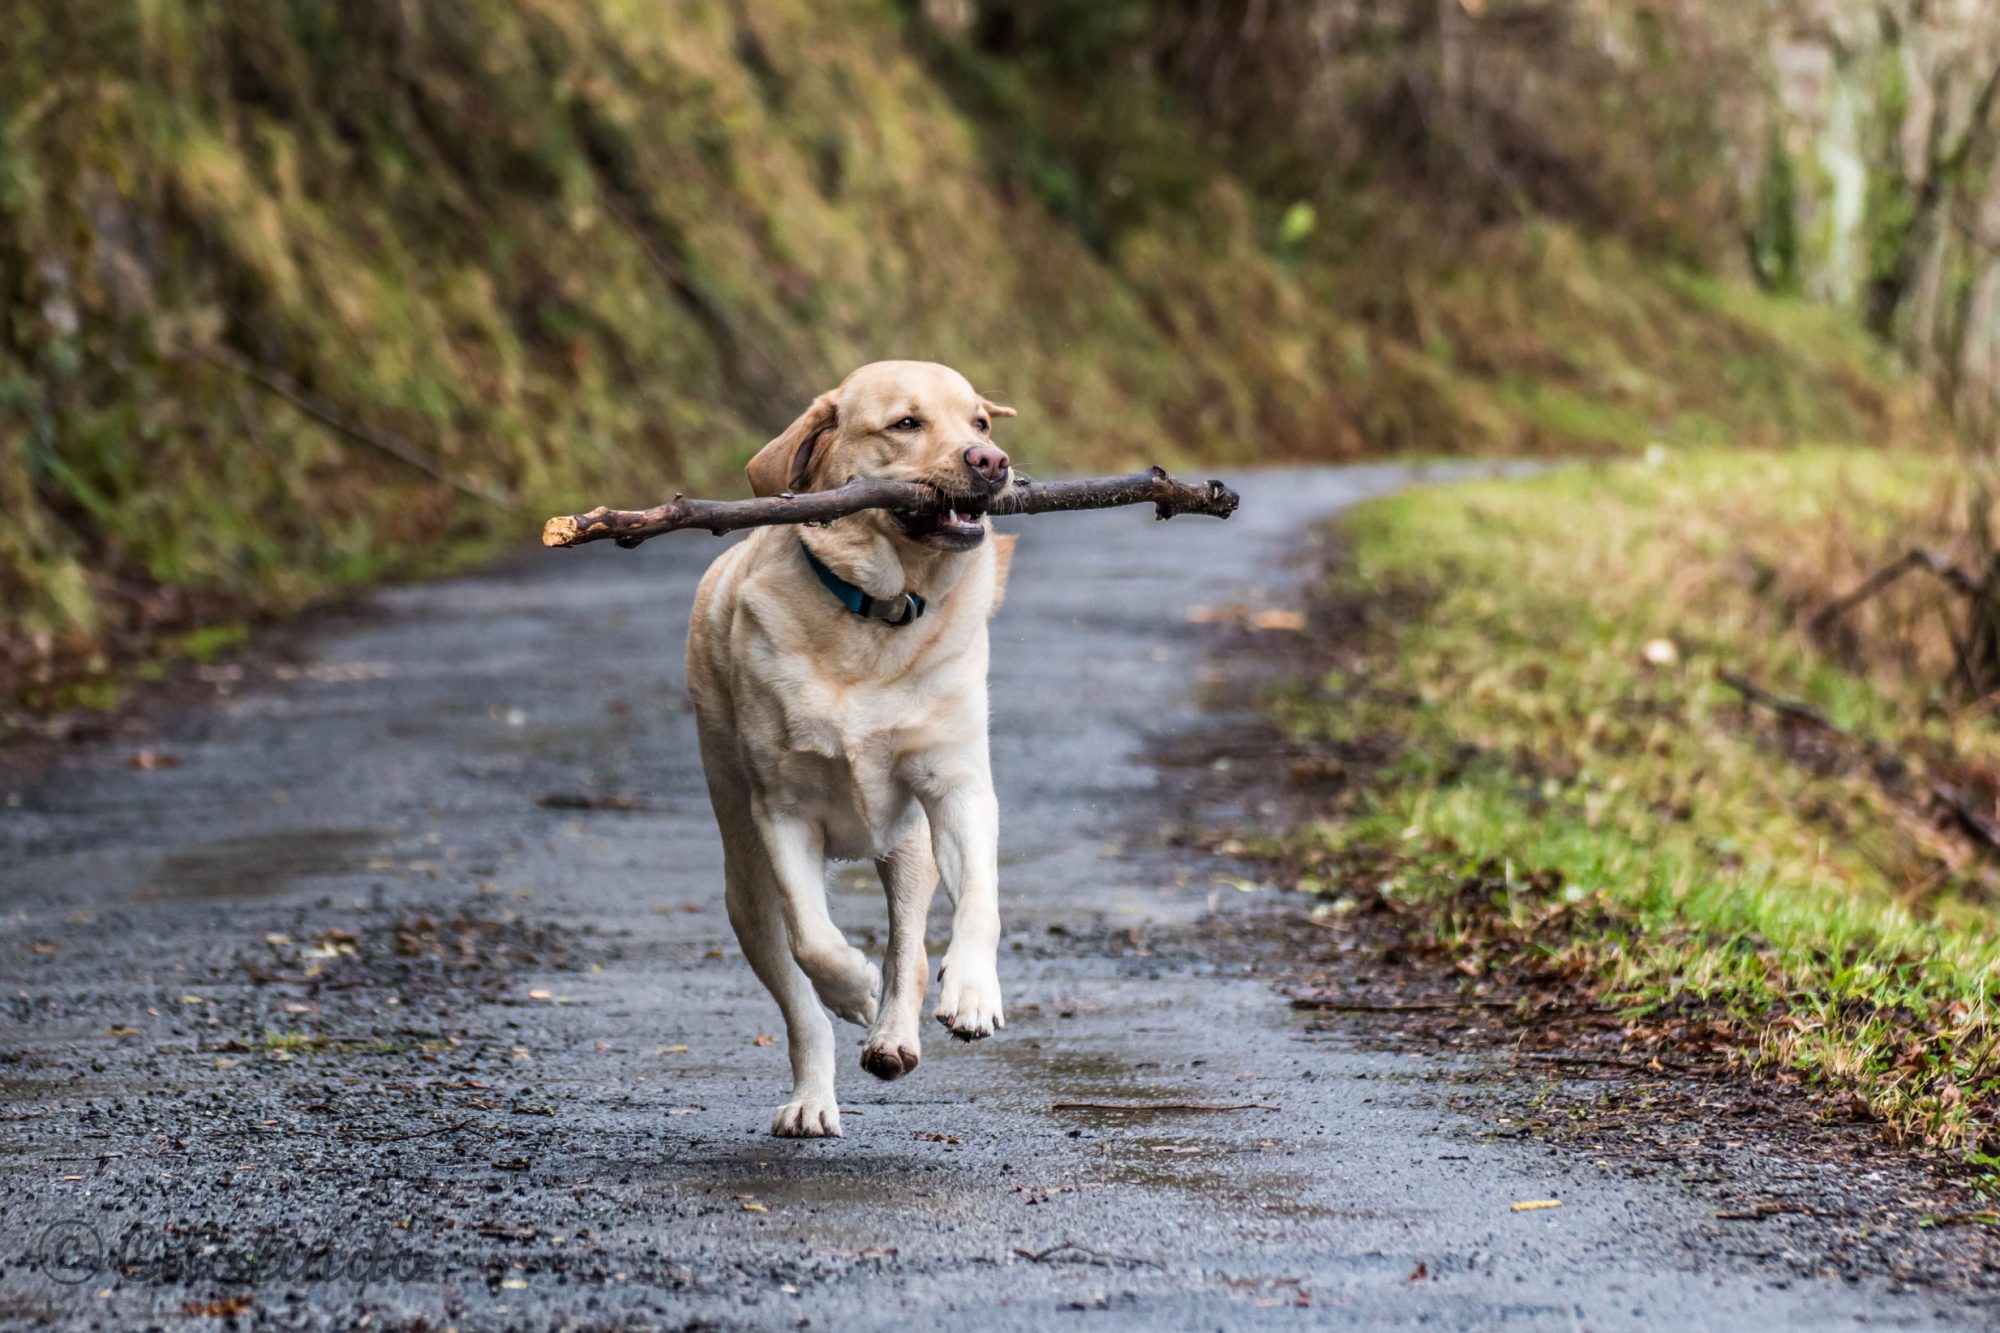 A dog carries a big stick in its mouth.